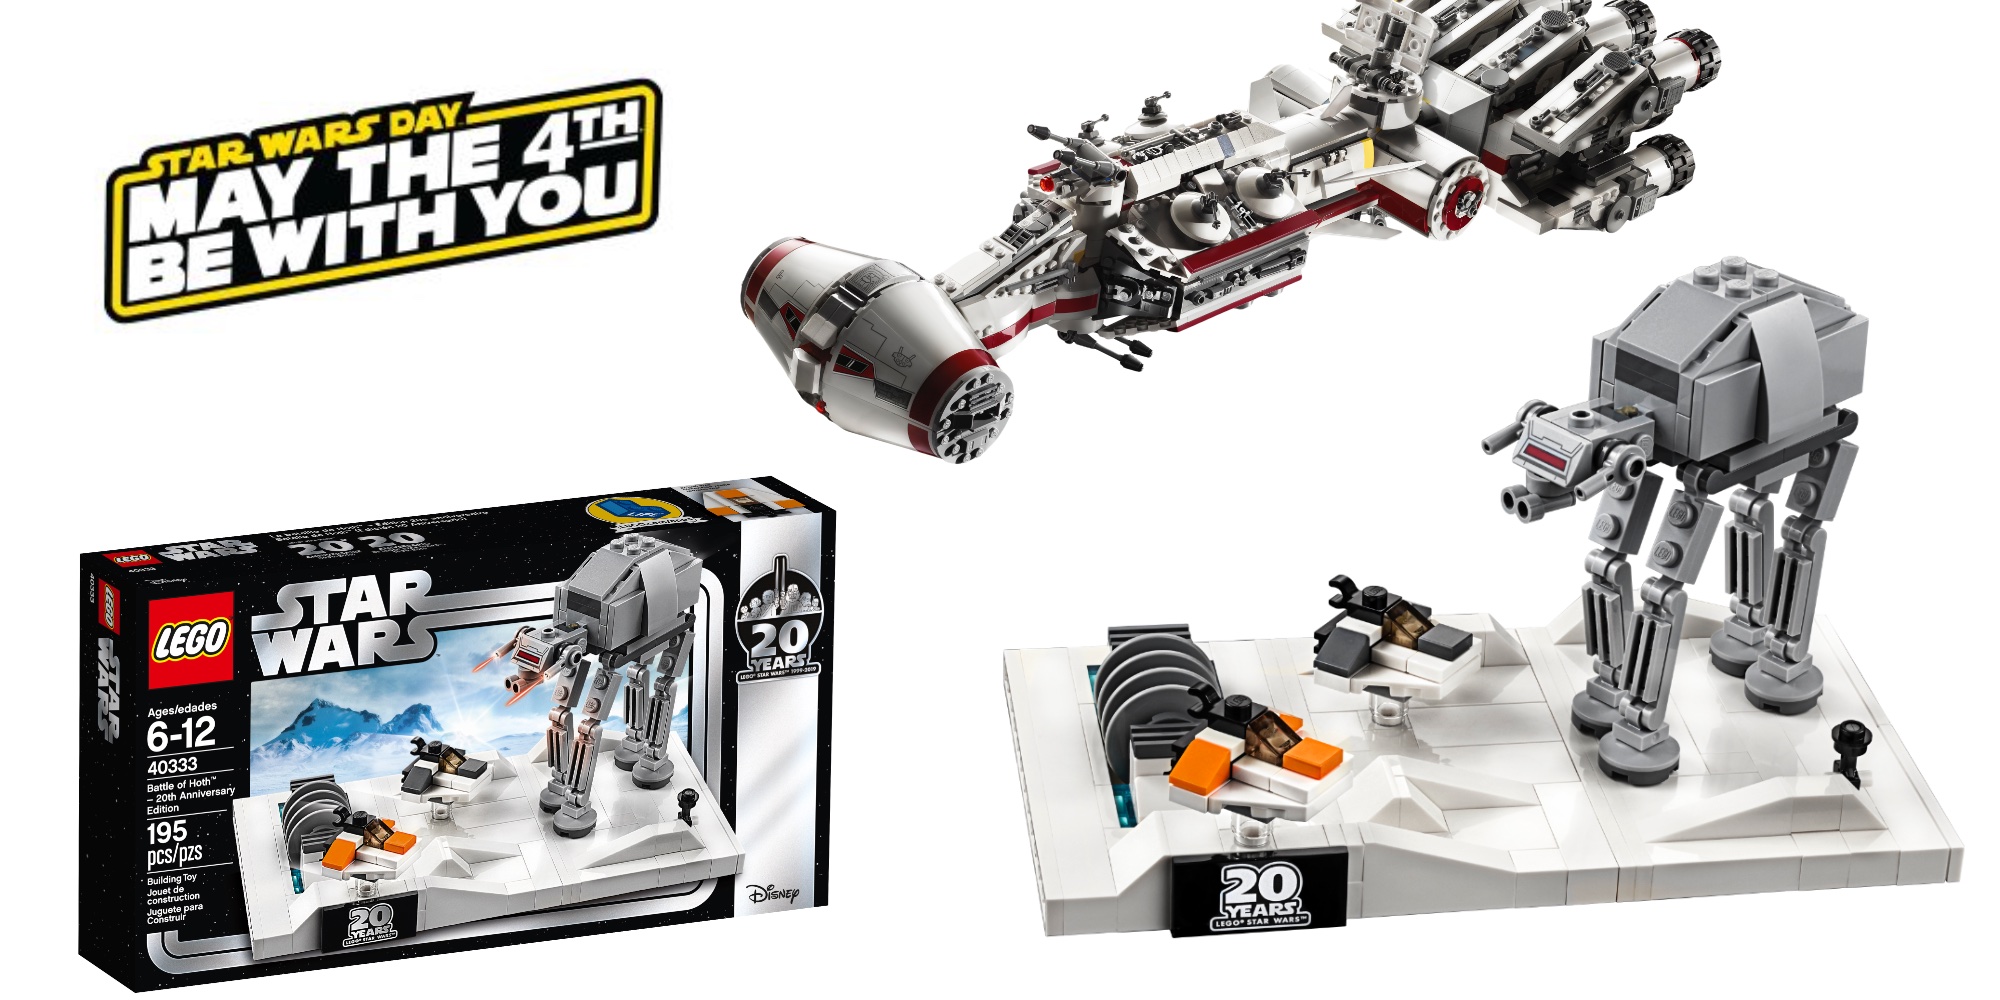 LEGO Battle of Hoth launches for May the 4th promotion 9to5Toys